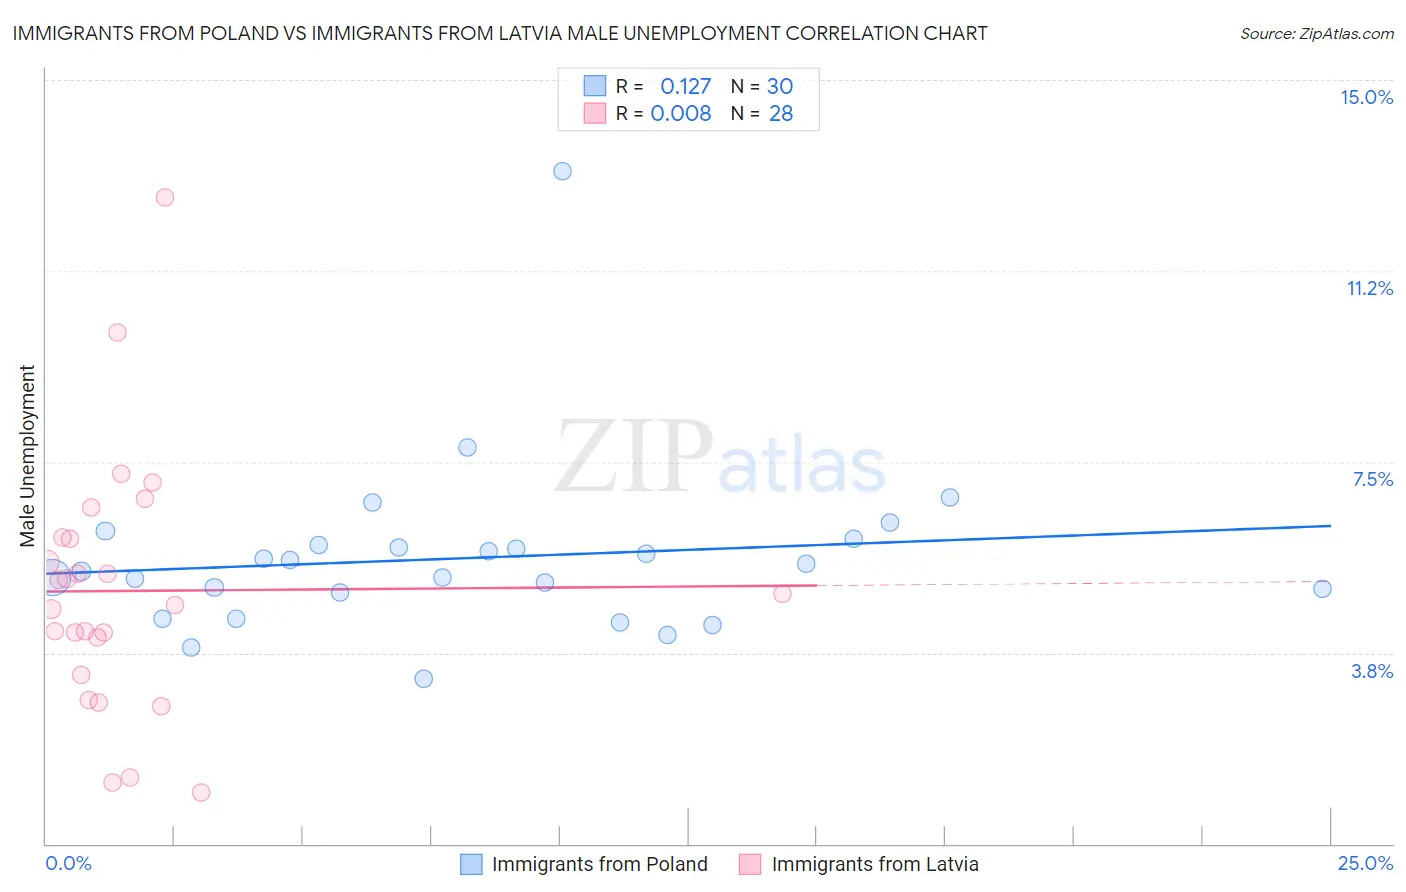 Immigrants from Poland vs Immigrants from Latvia Male Unemployment